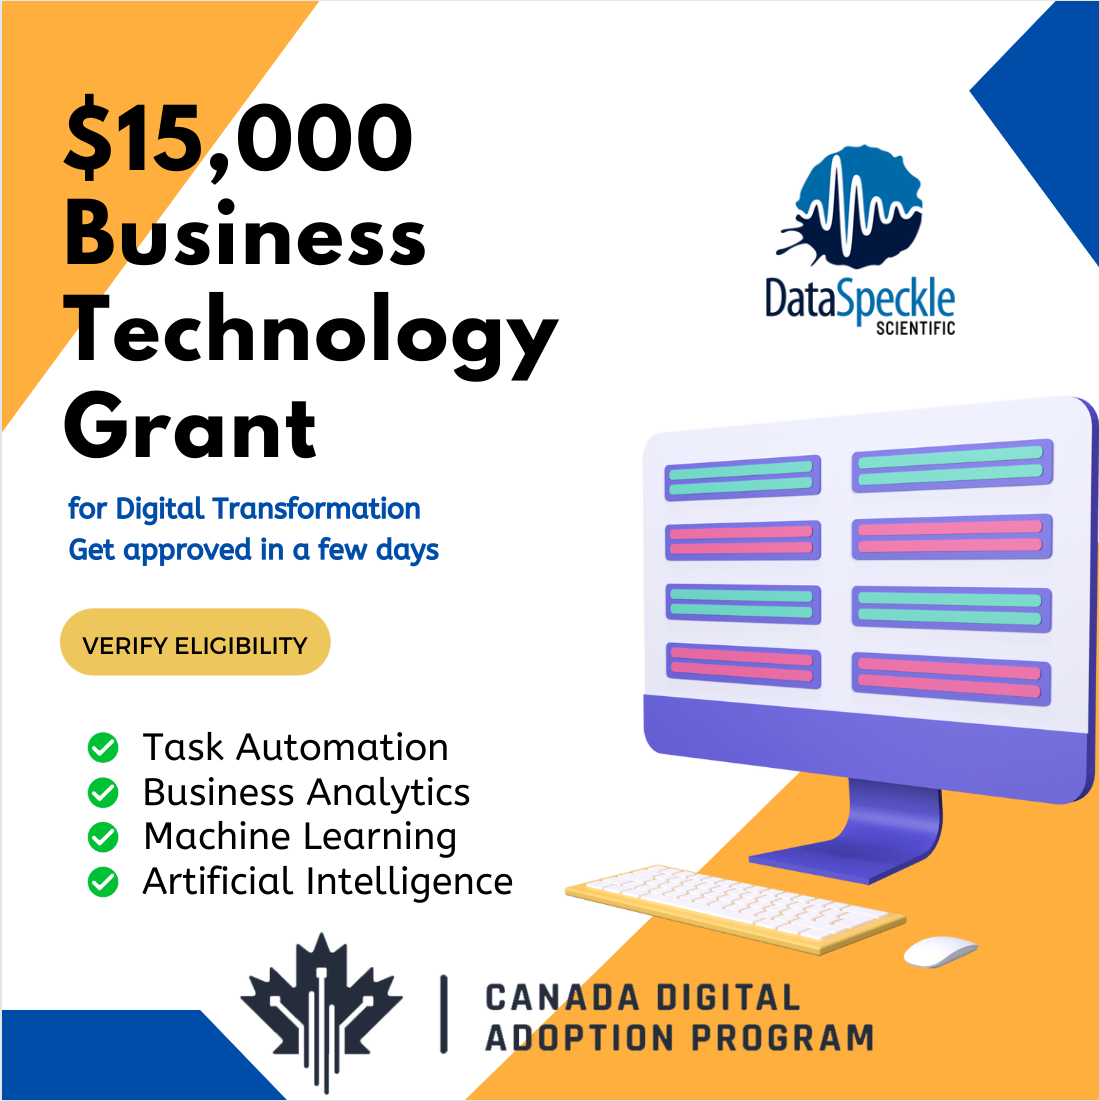 The Canadian Digital Adoption program is currently providing a grant of $15,000 towards the digitization of businesses. We would be delighted to assist you in your journey towards digital transformation.